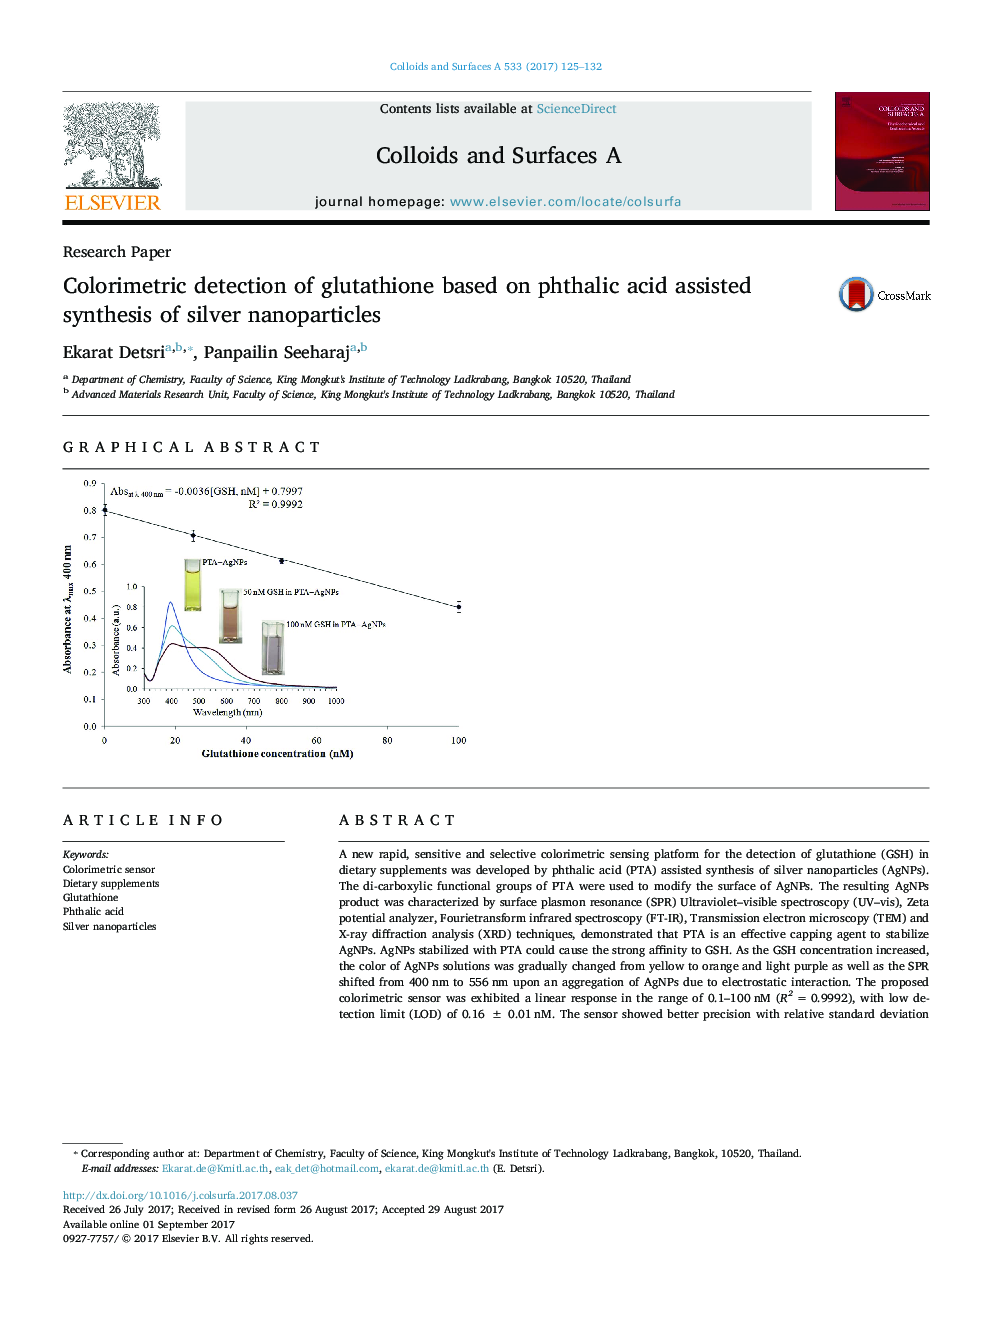 Colorimetric detection of glutathione based on phthalic acid assisted synthesis of silver nanoparticles